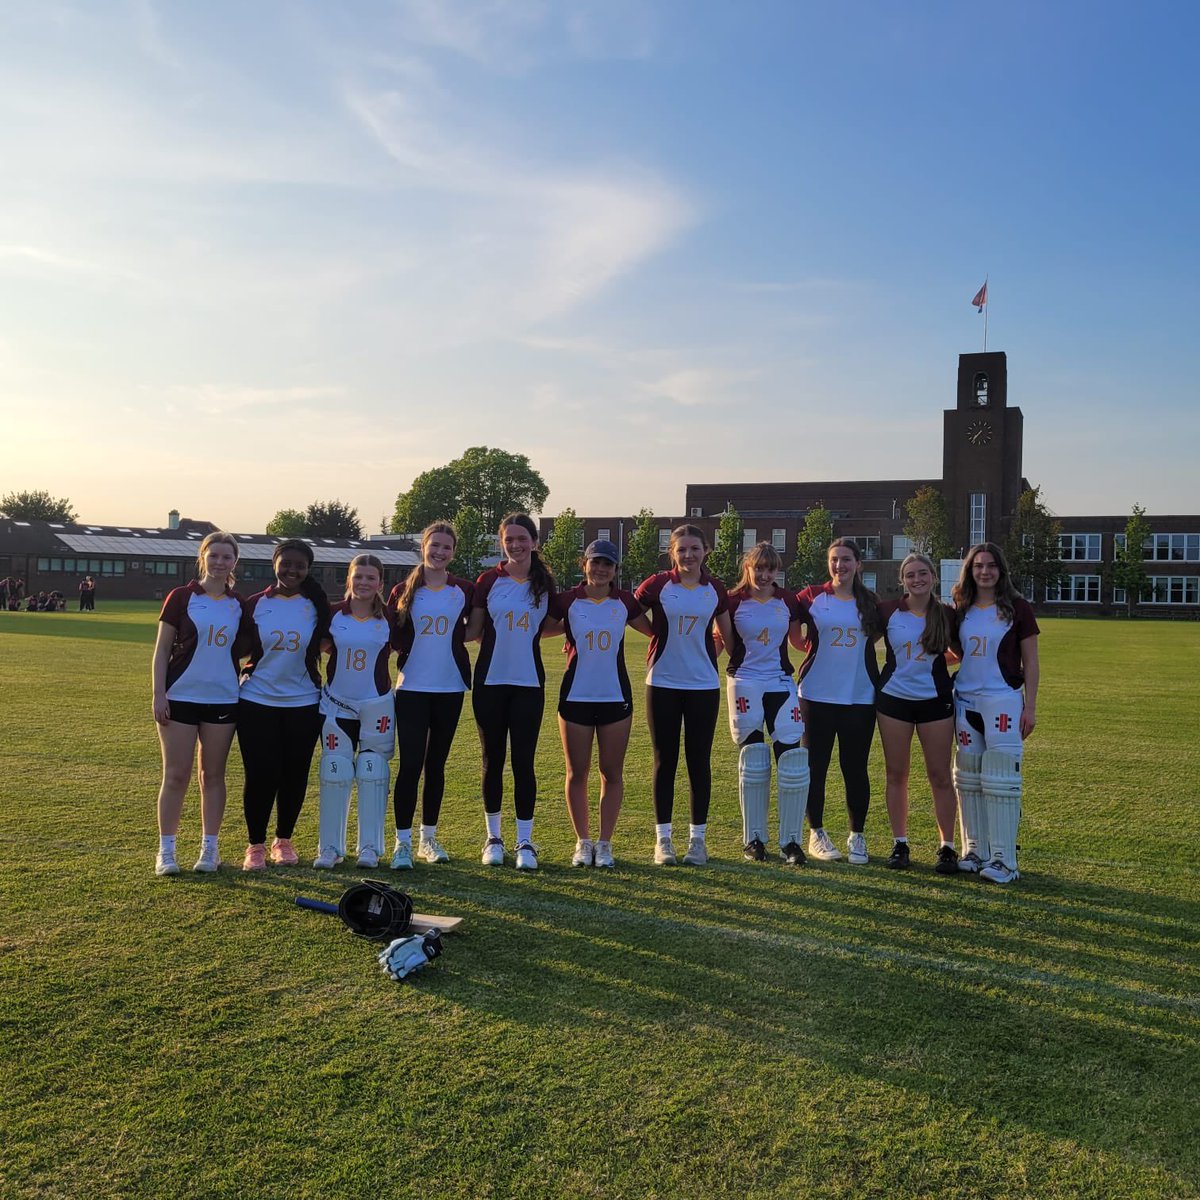 On Friday evening our 1XI played their first round game of the School Sports Magazine U18 National Cup. The team was successful, taking a win in the 20th over with just 1 ball remaining @schoolsportmag @PHSSportsDep @PrescottJane #cricket @TheCricketerMag